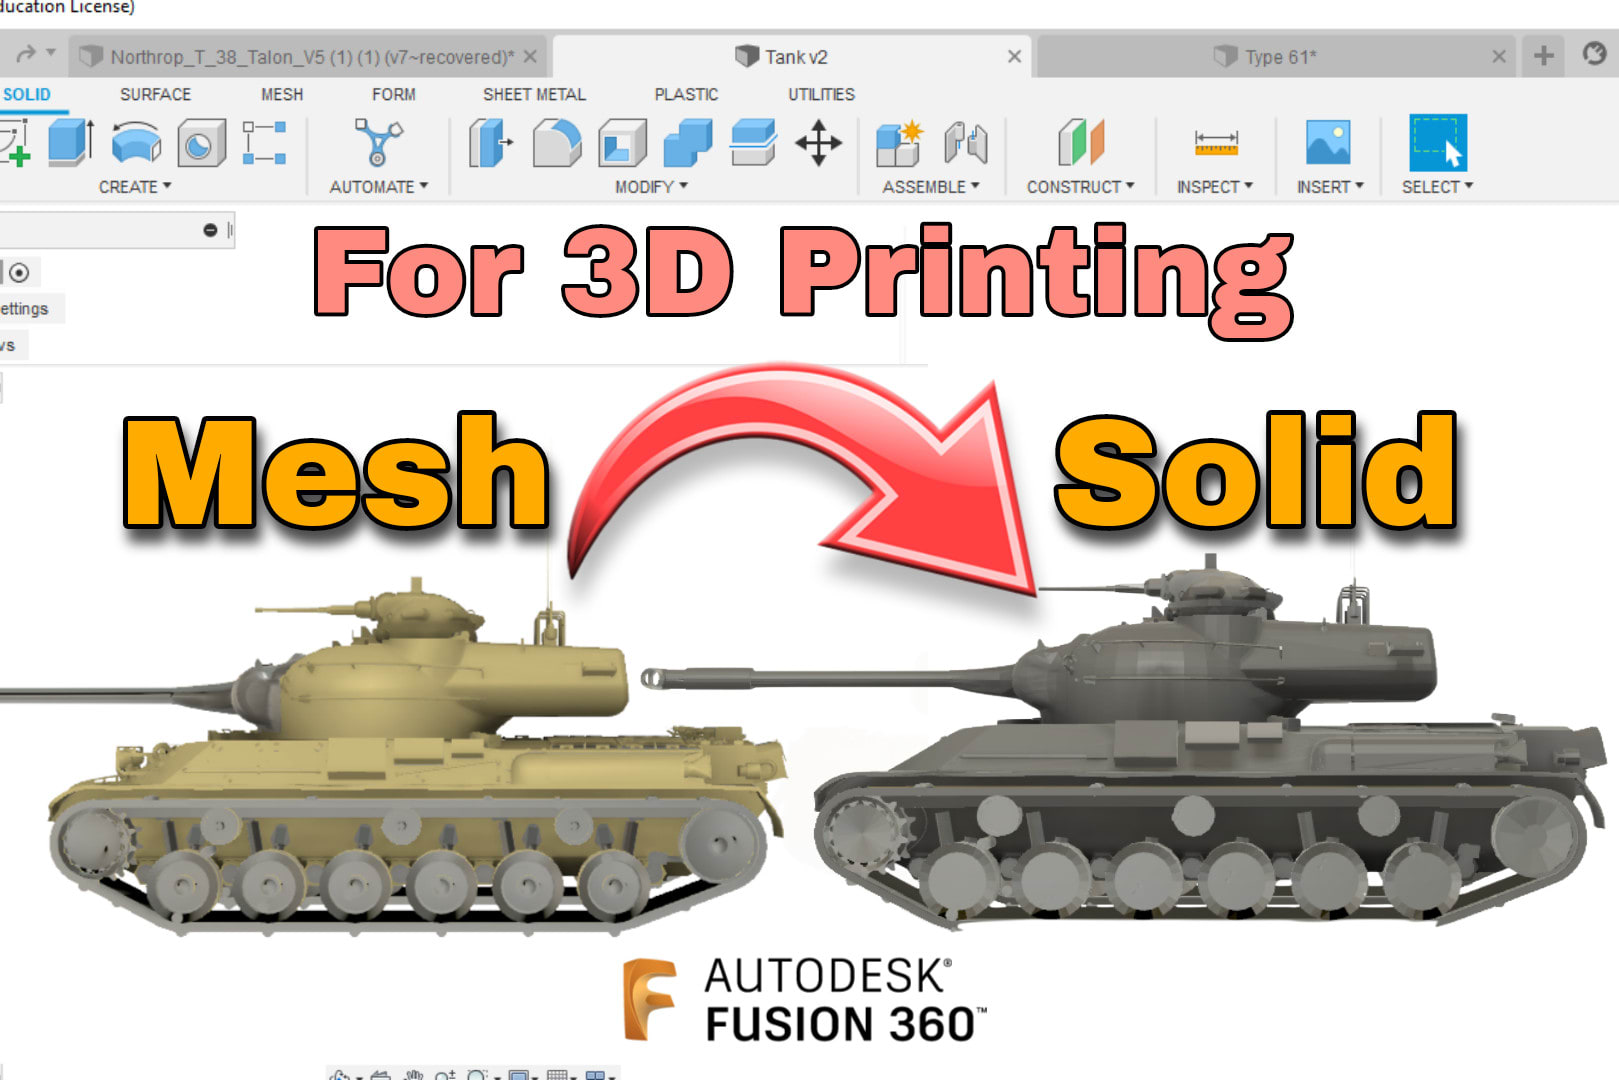 Convert mesh to solid for 3d printing using fusion 360 by Ansar88 | Fiverr